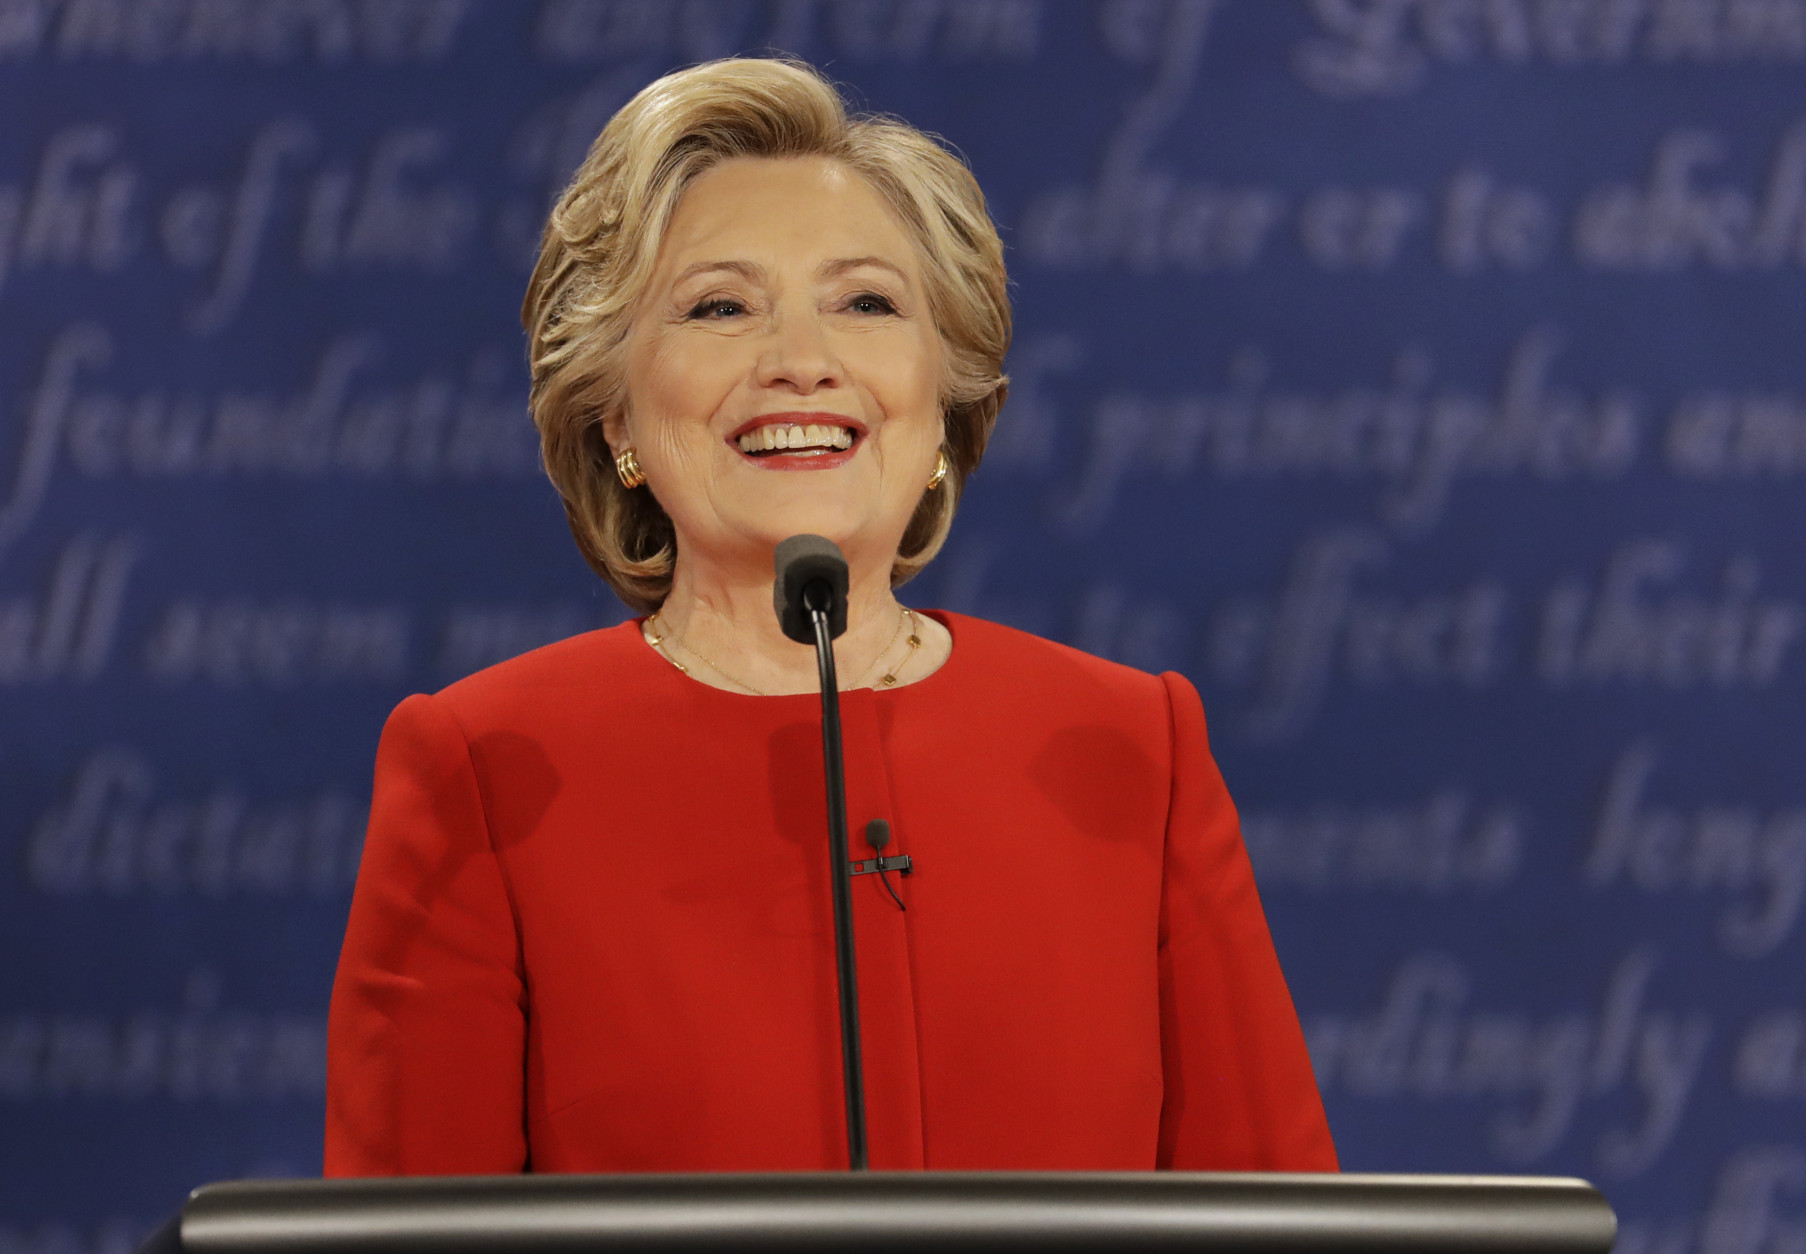 Democratic presidential nominee Hillary Clinton speaks during the presidential debate with Republican presidential nominee Donald Trump at Hofstra University in Hempstead, N.Y., Monday, Sept. 26, 2016. (AP Photo/Julio Cortez)